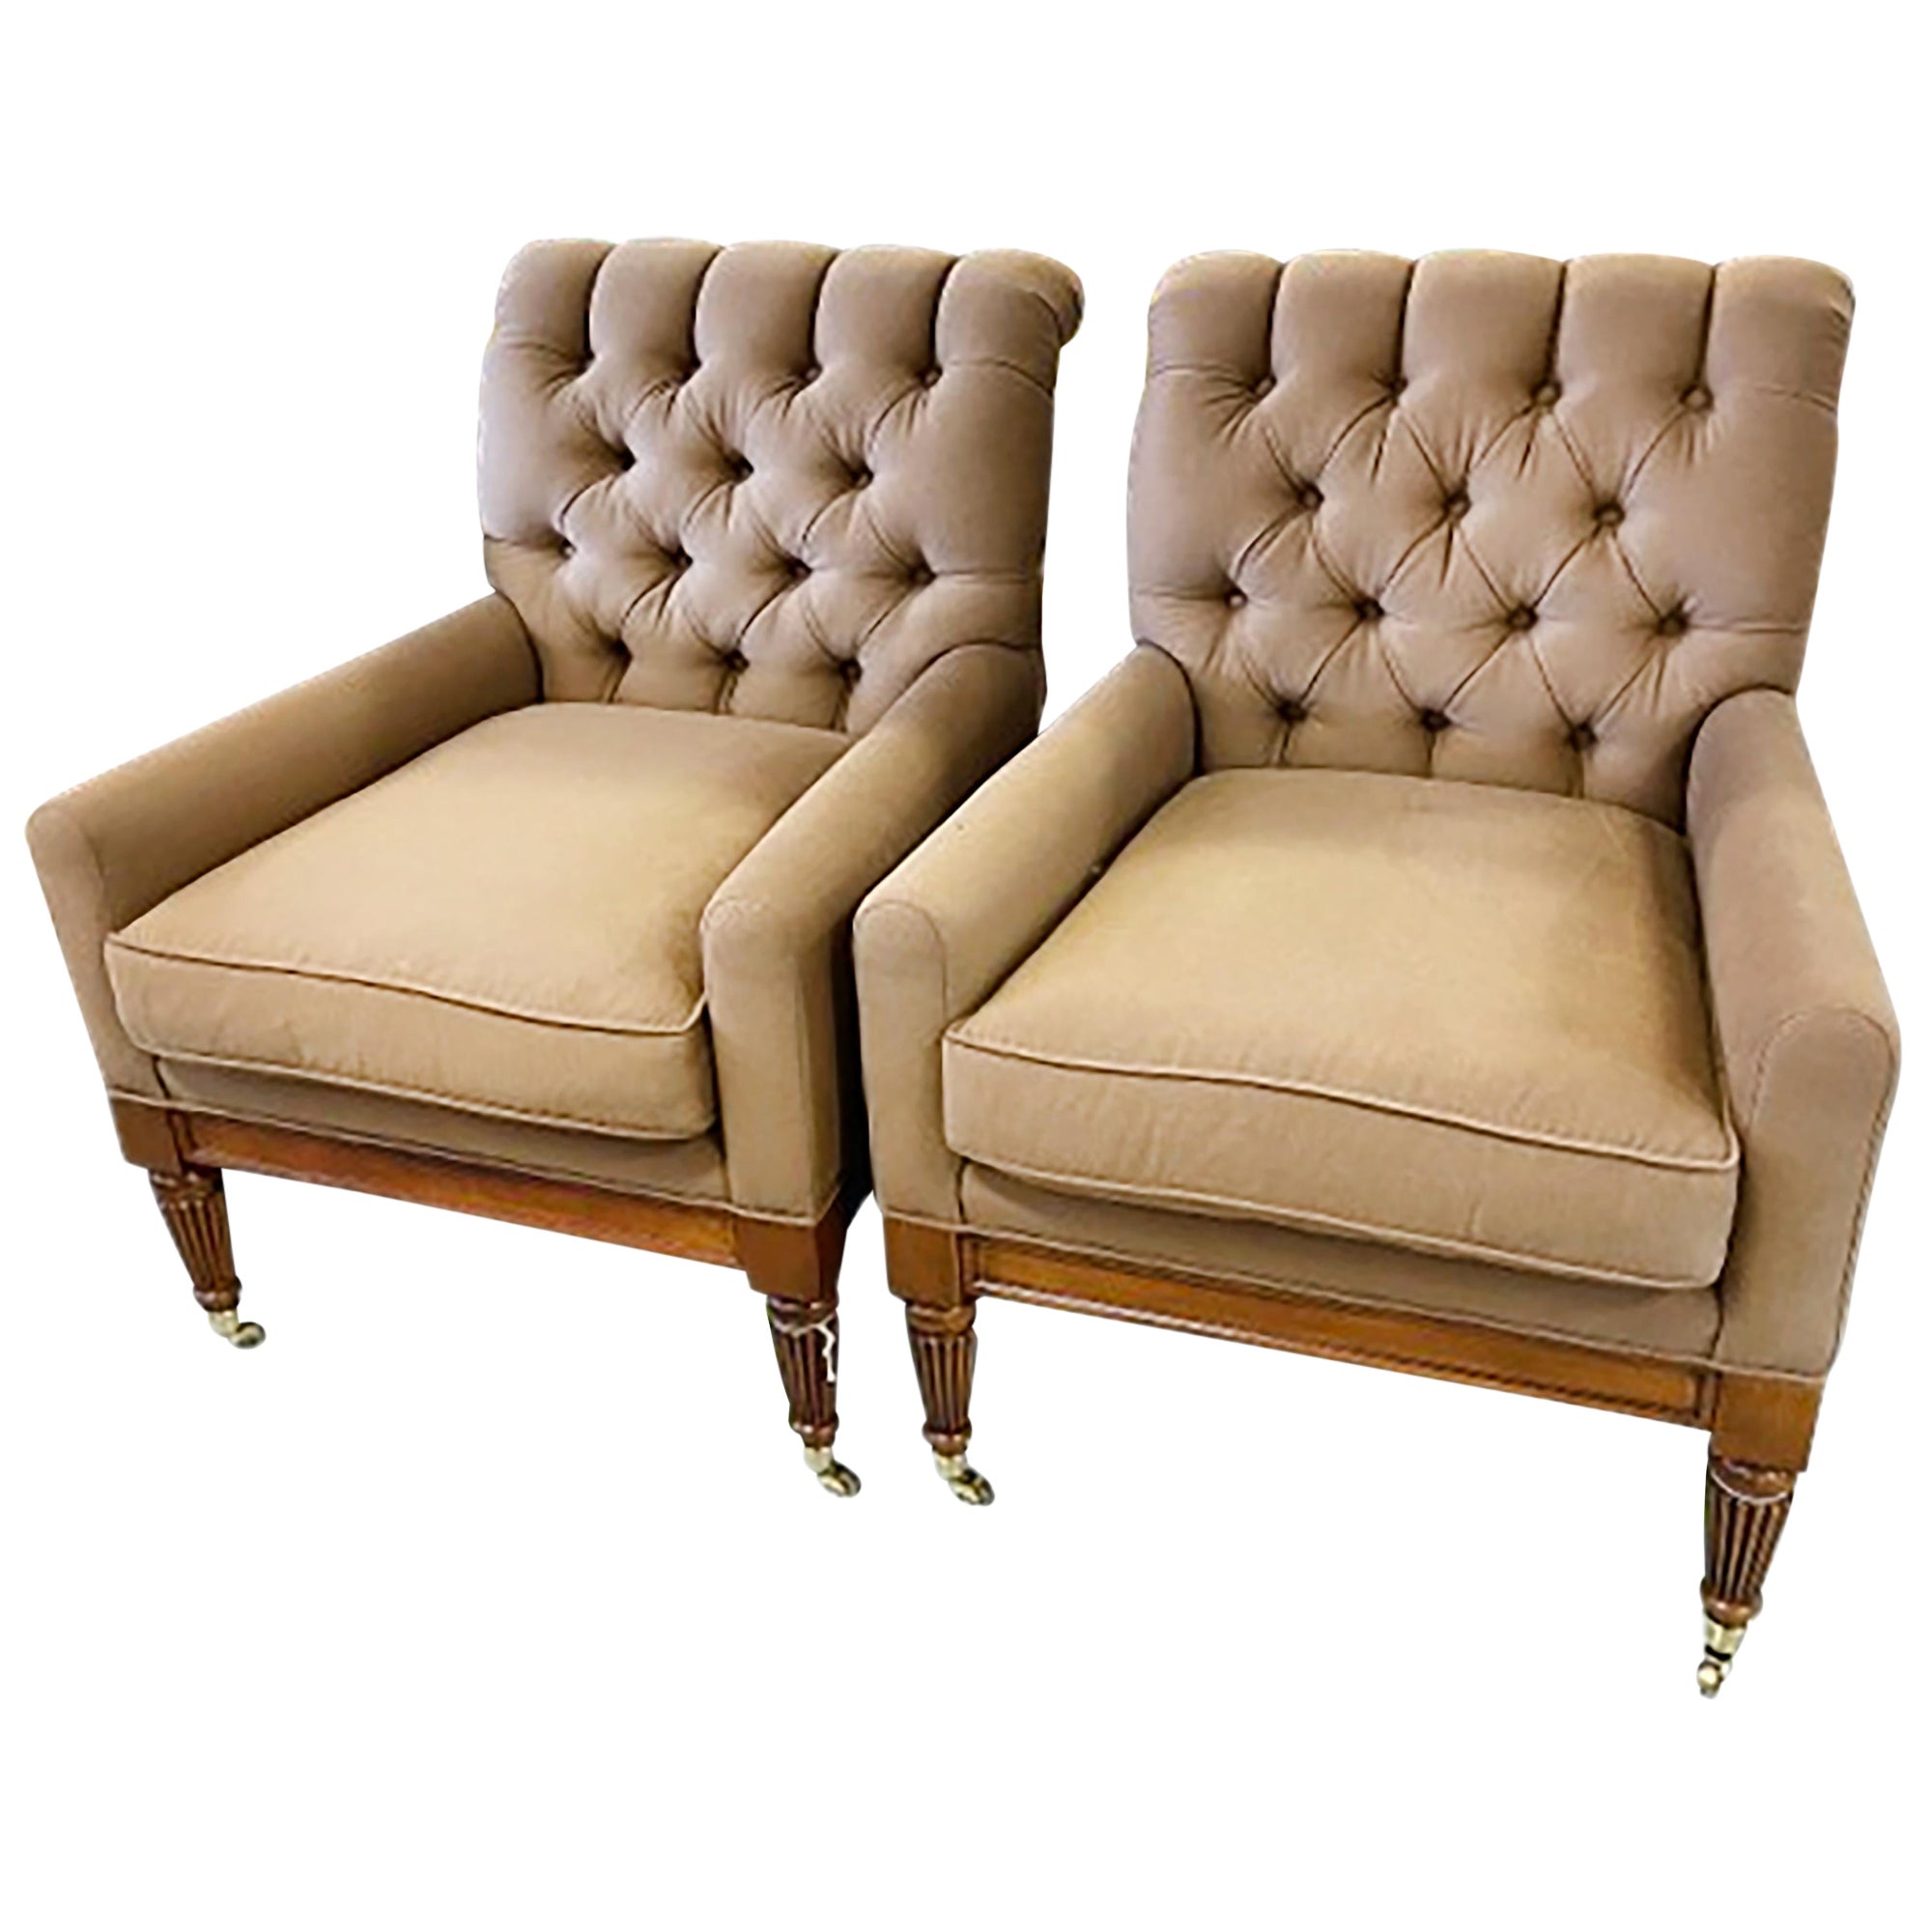 Pair of 19th Century English Armchairs Tufted with Light Brown Wool Upholstery For Sale